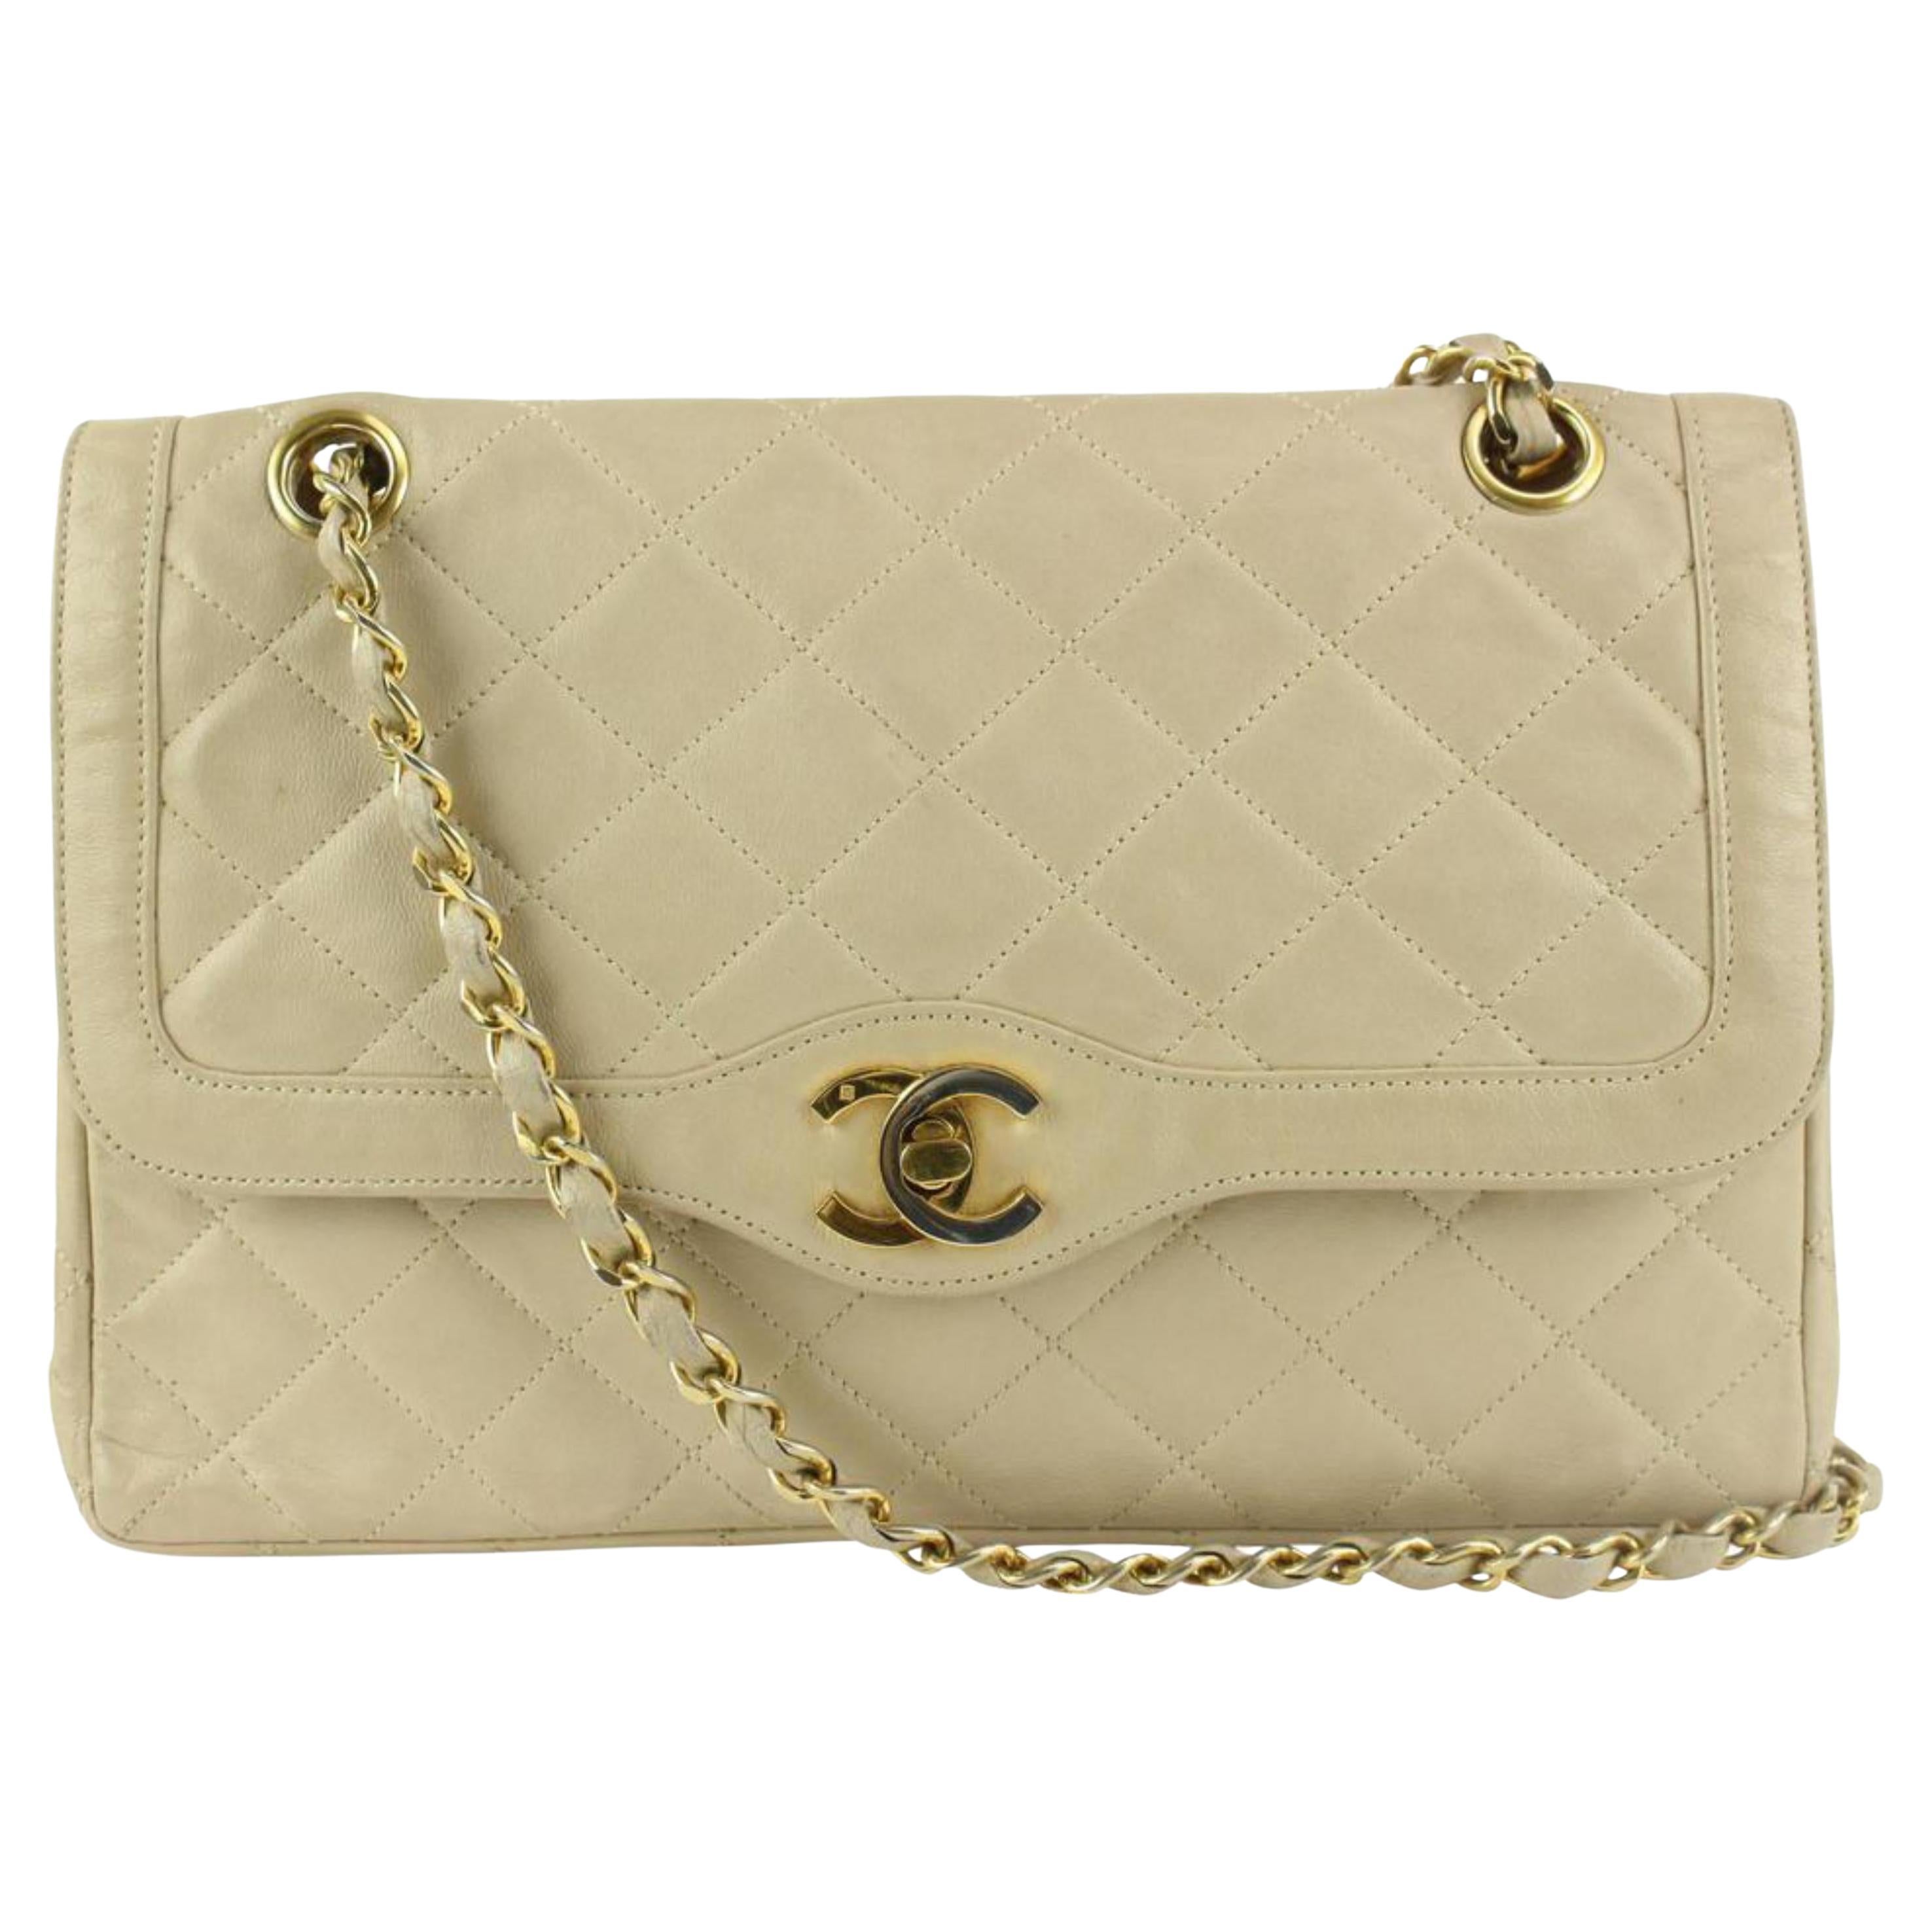 Lot - Classic CHANEL Two Toned Calfskin Leather Flap Bag